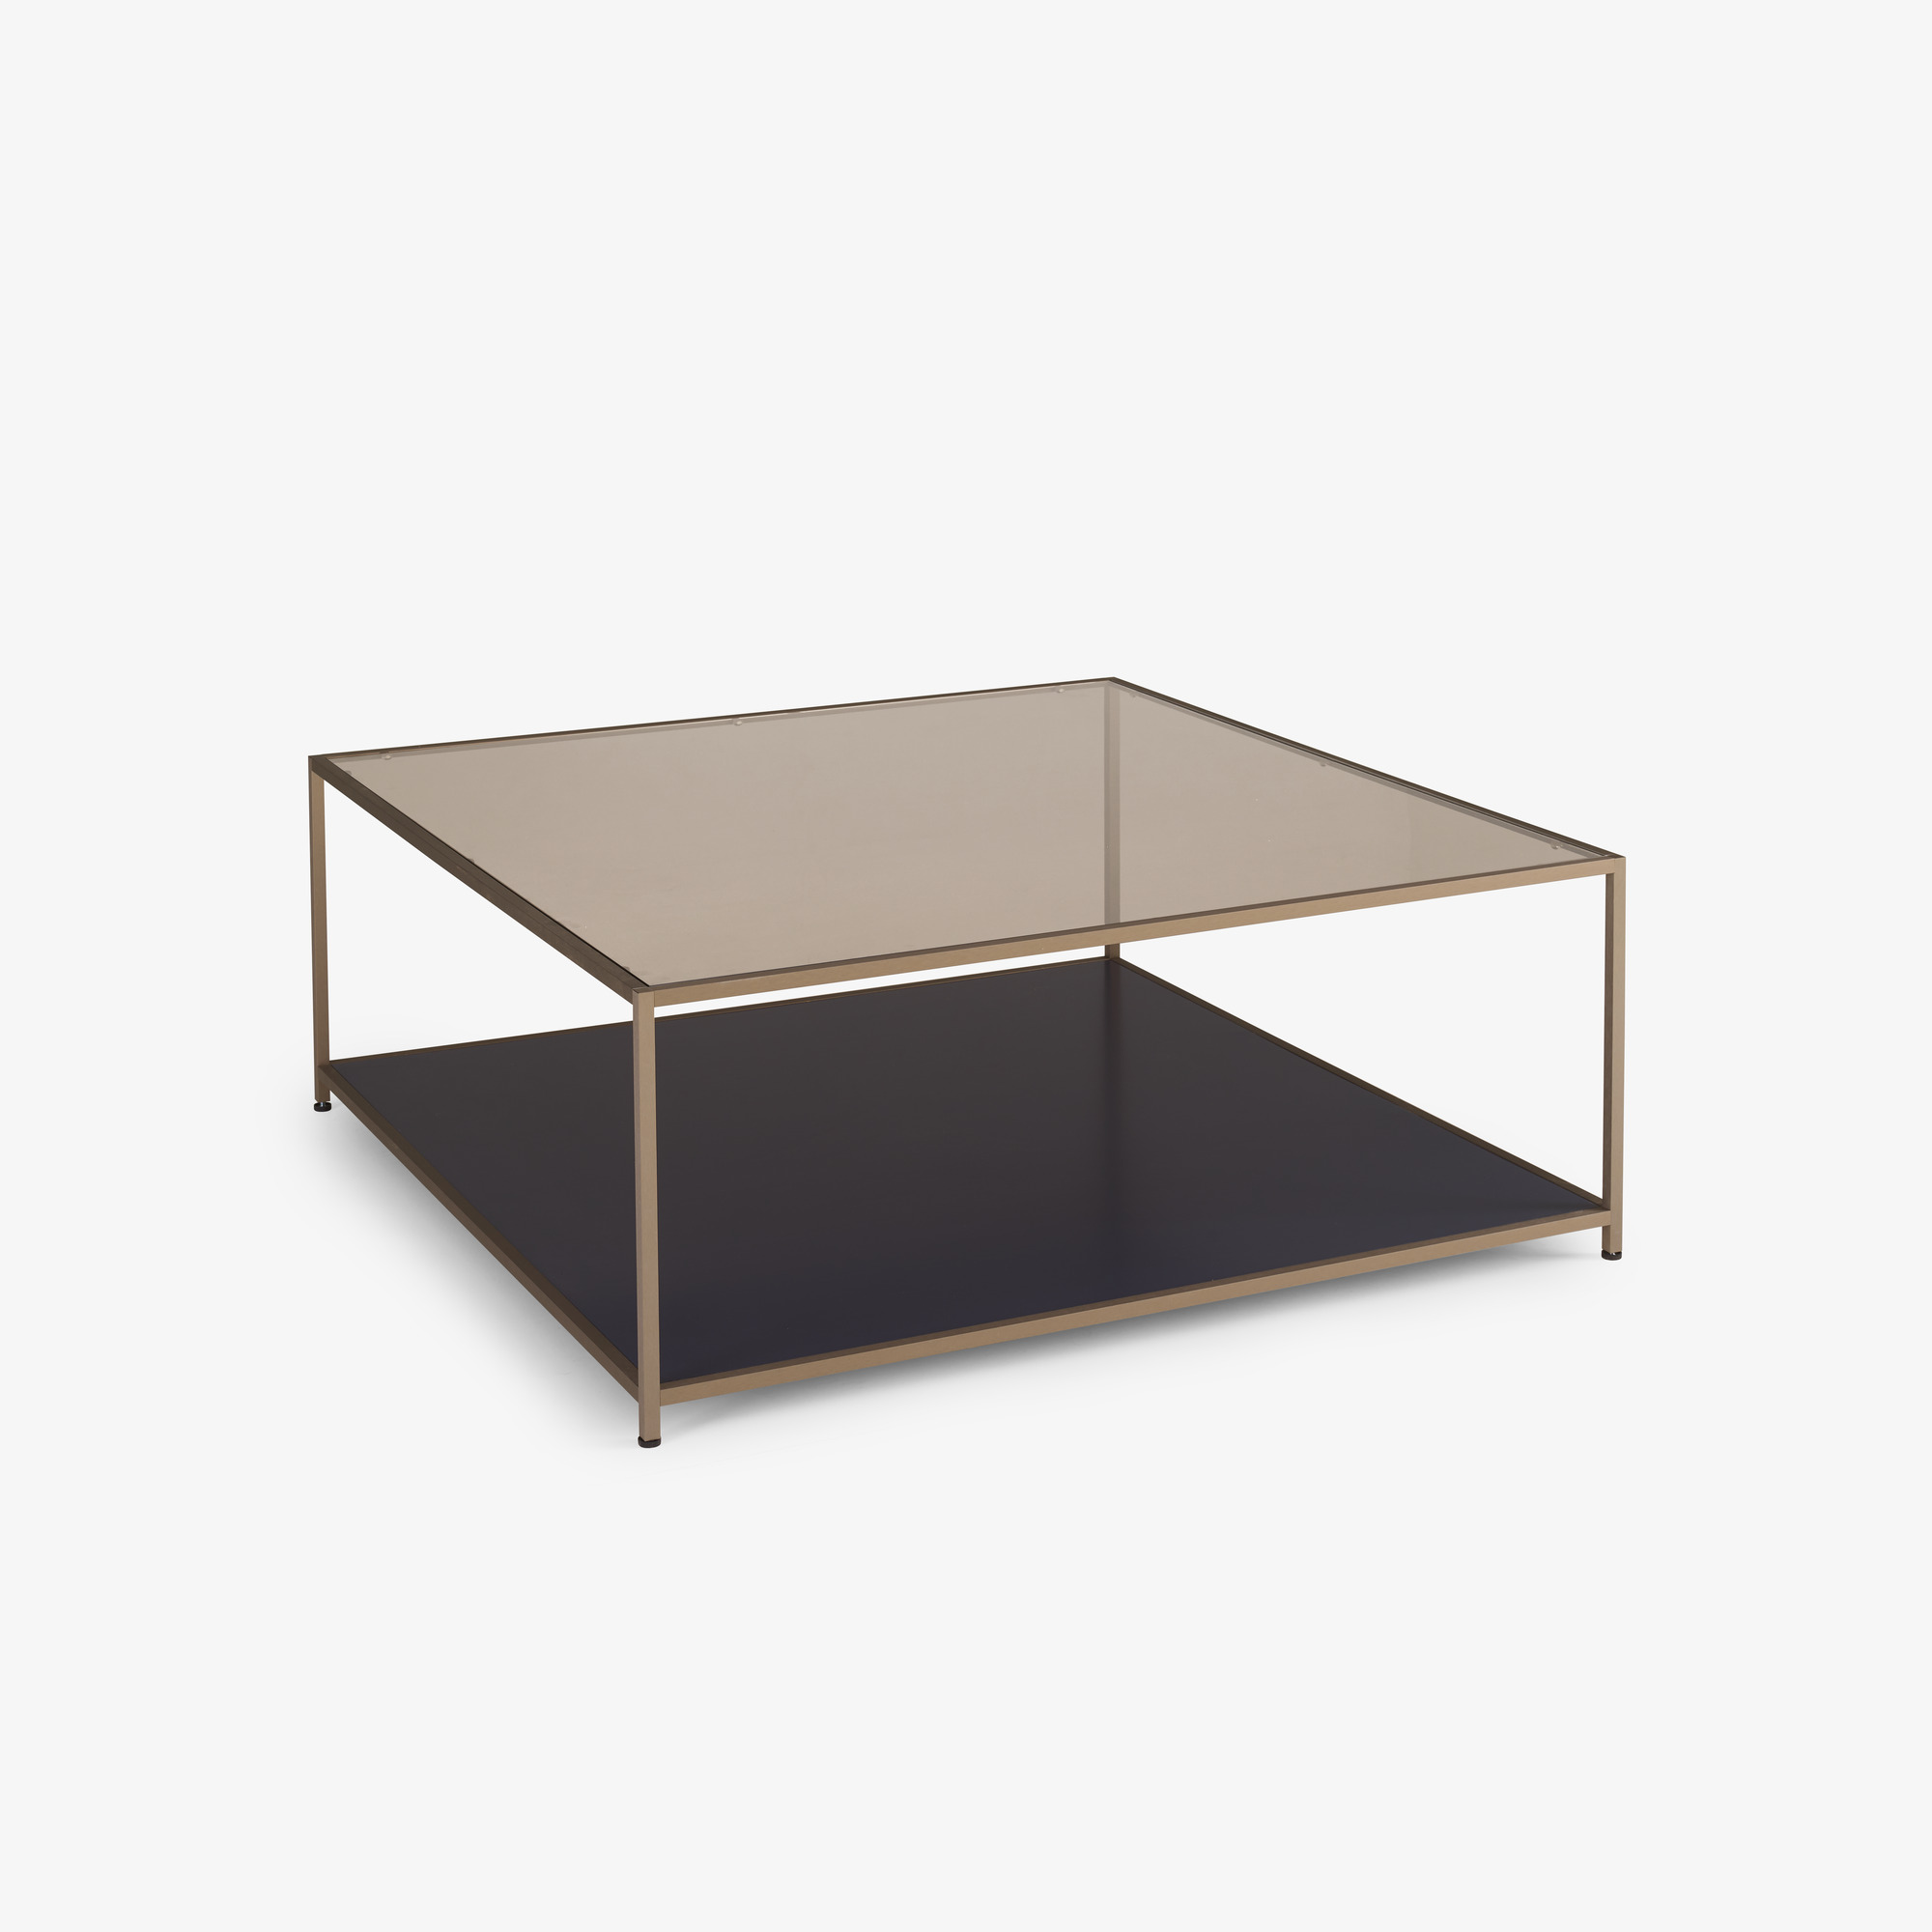 Image Square low table 2